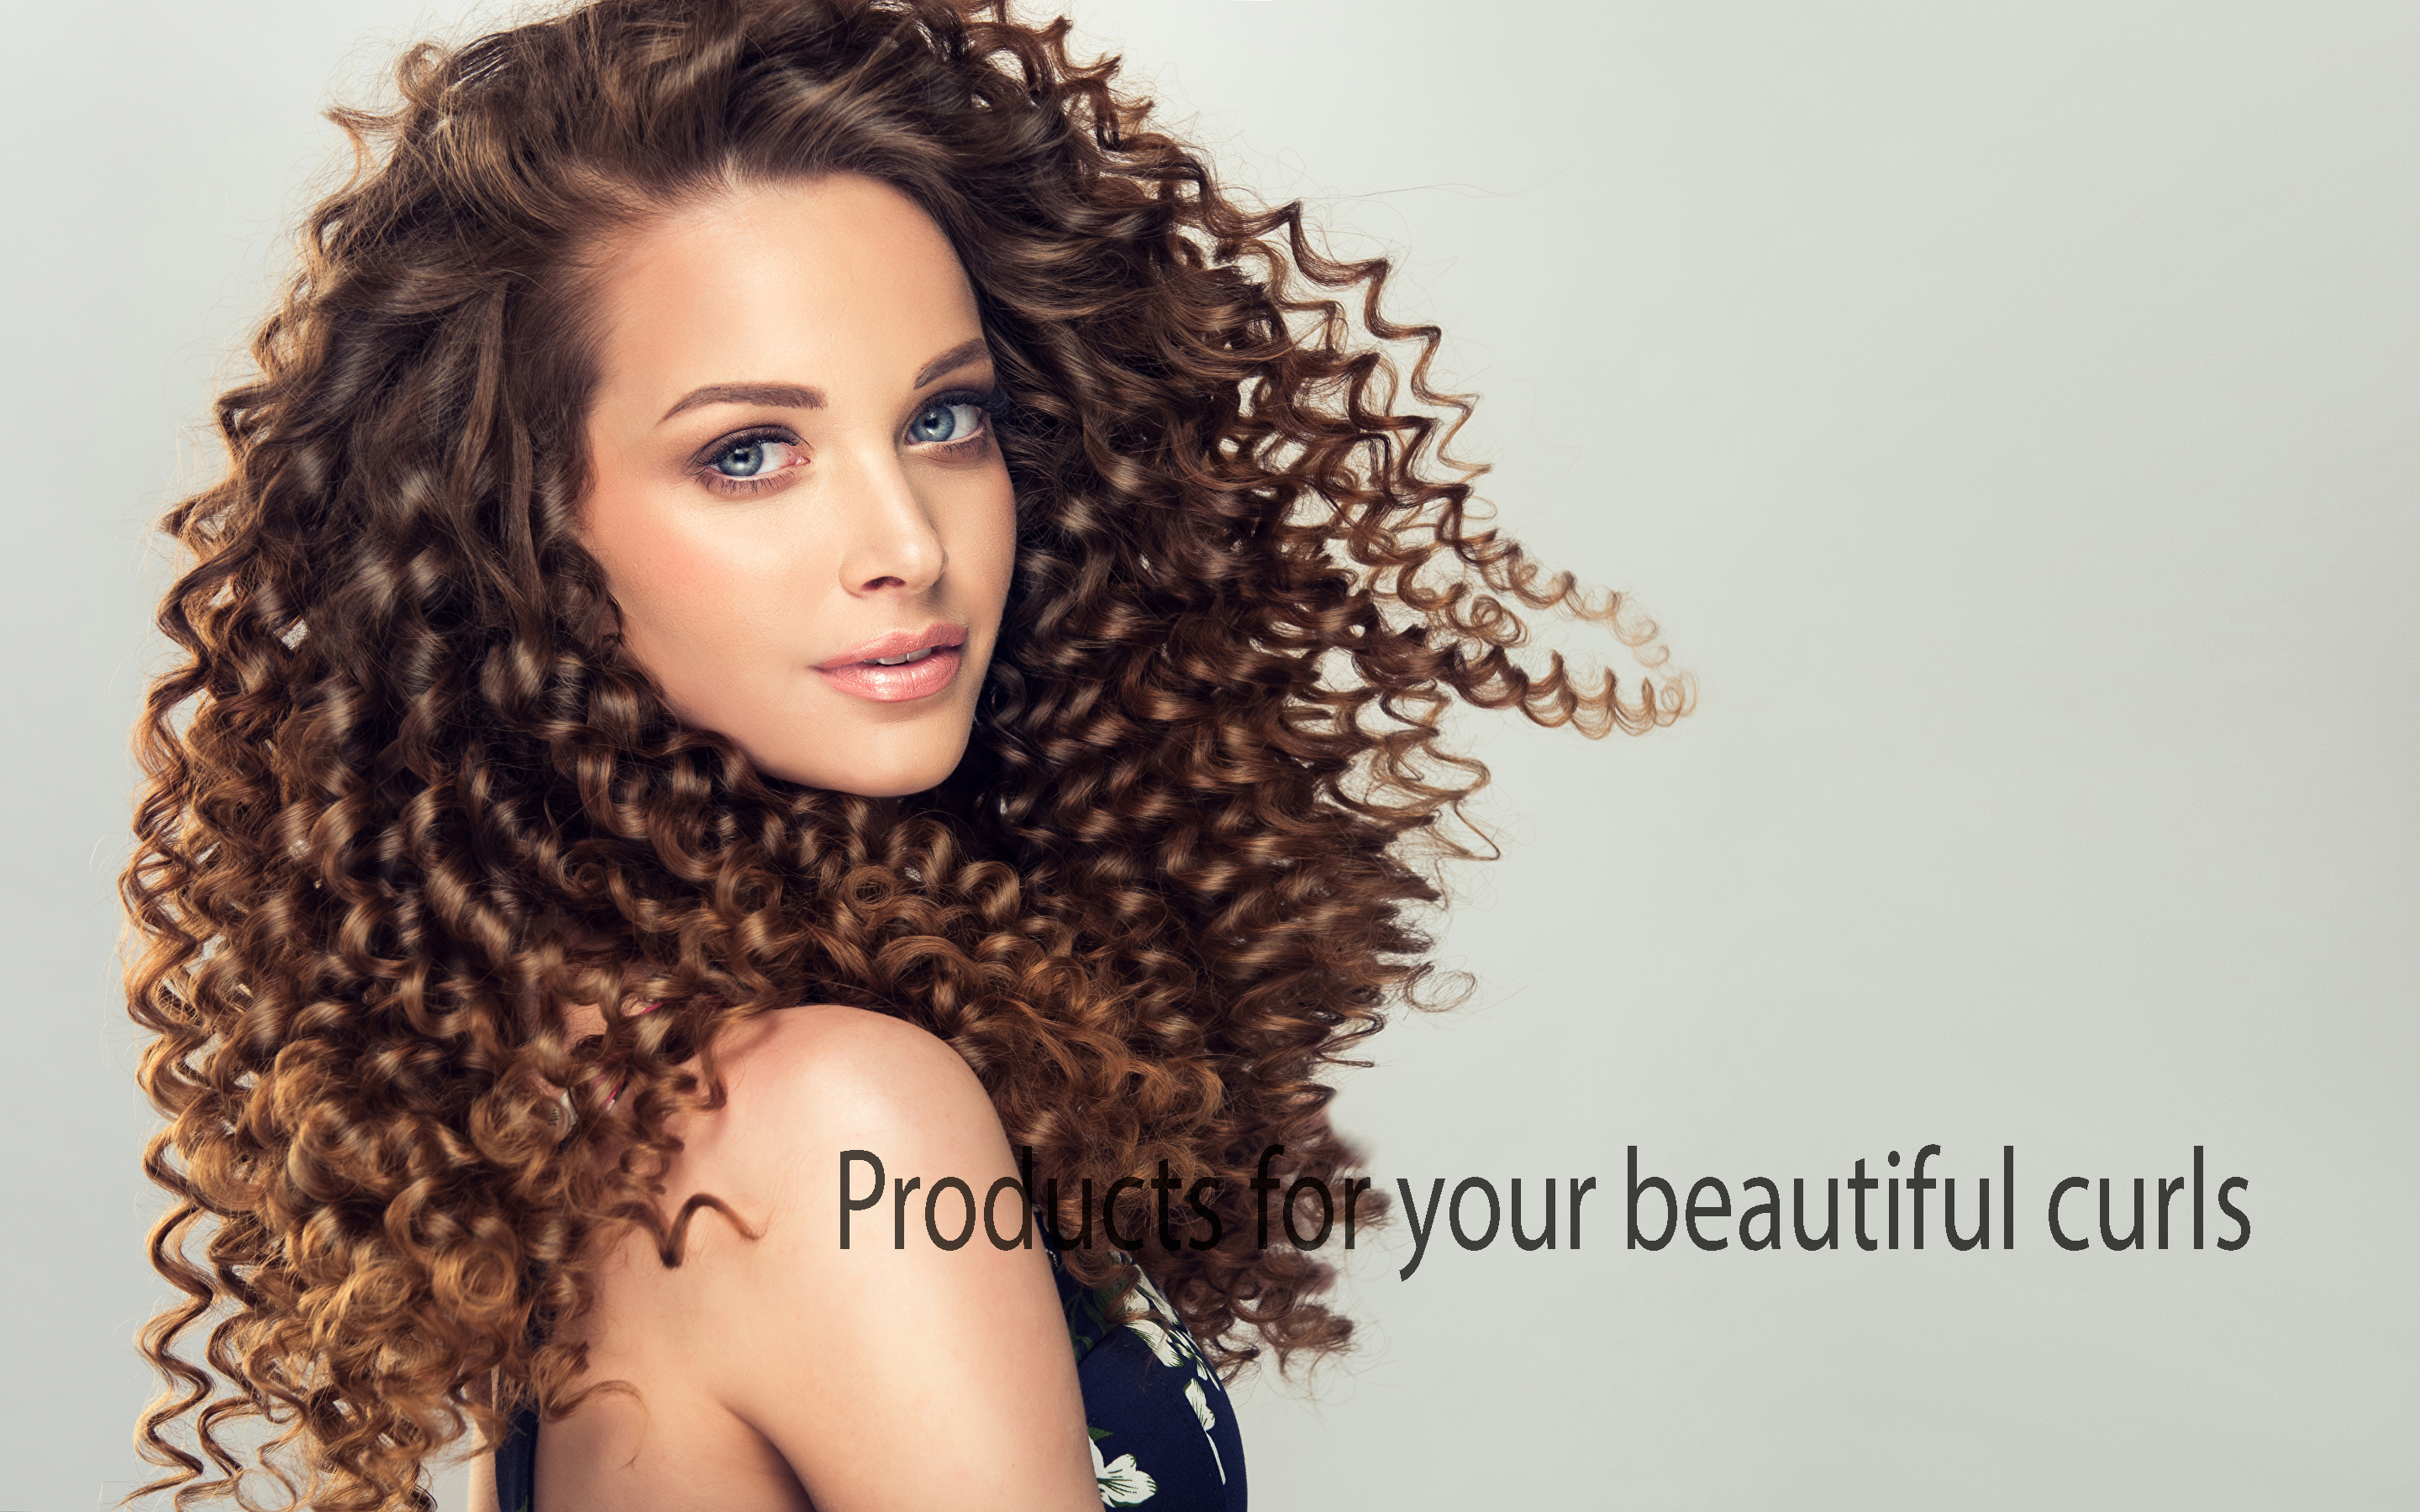 Products for your beautiful curls